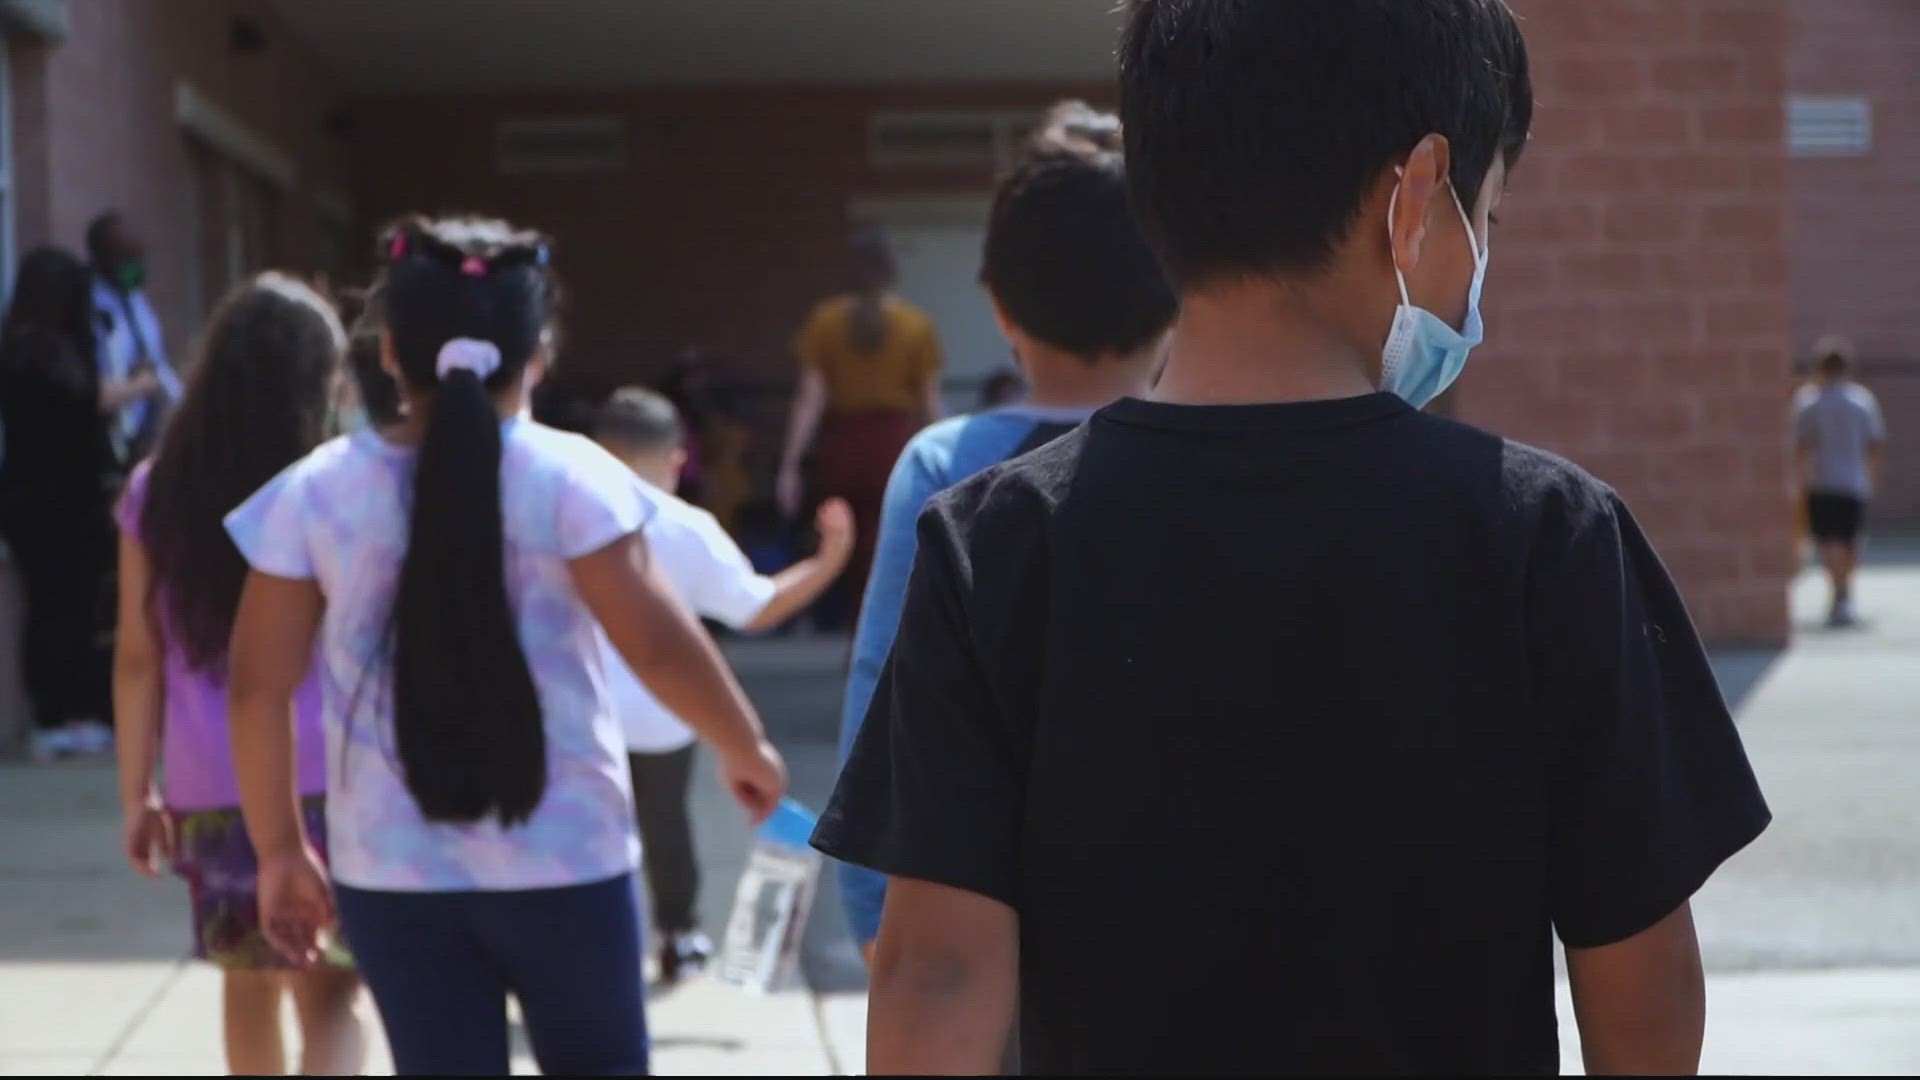 The students are required to wear masks for 10 days after at least three students tested positive.